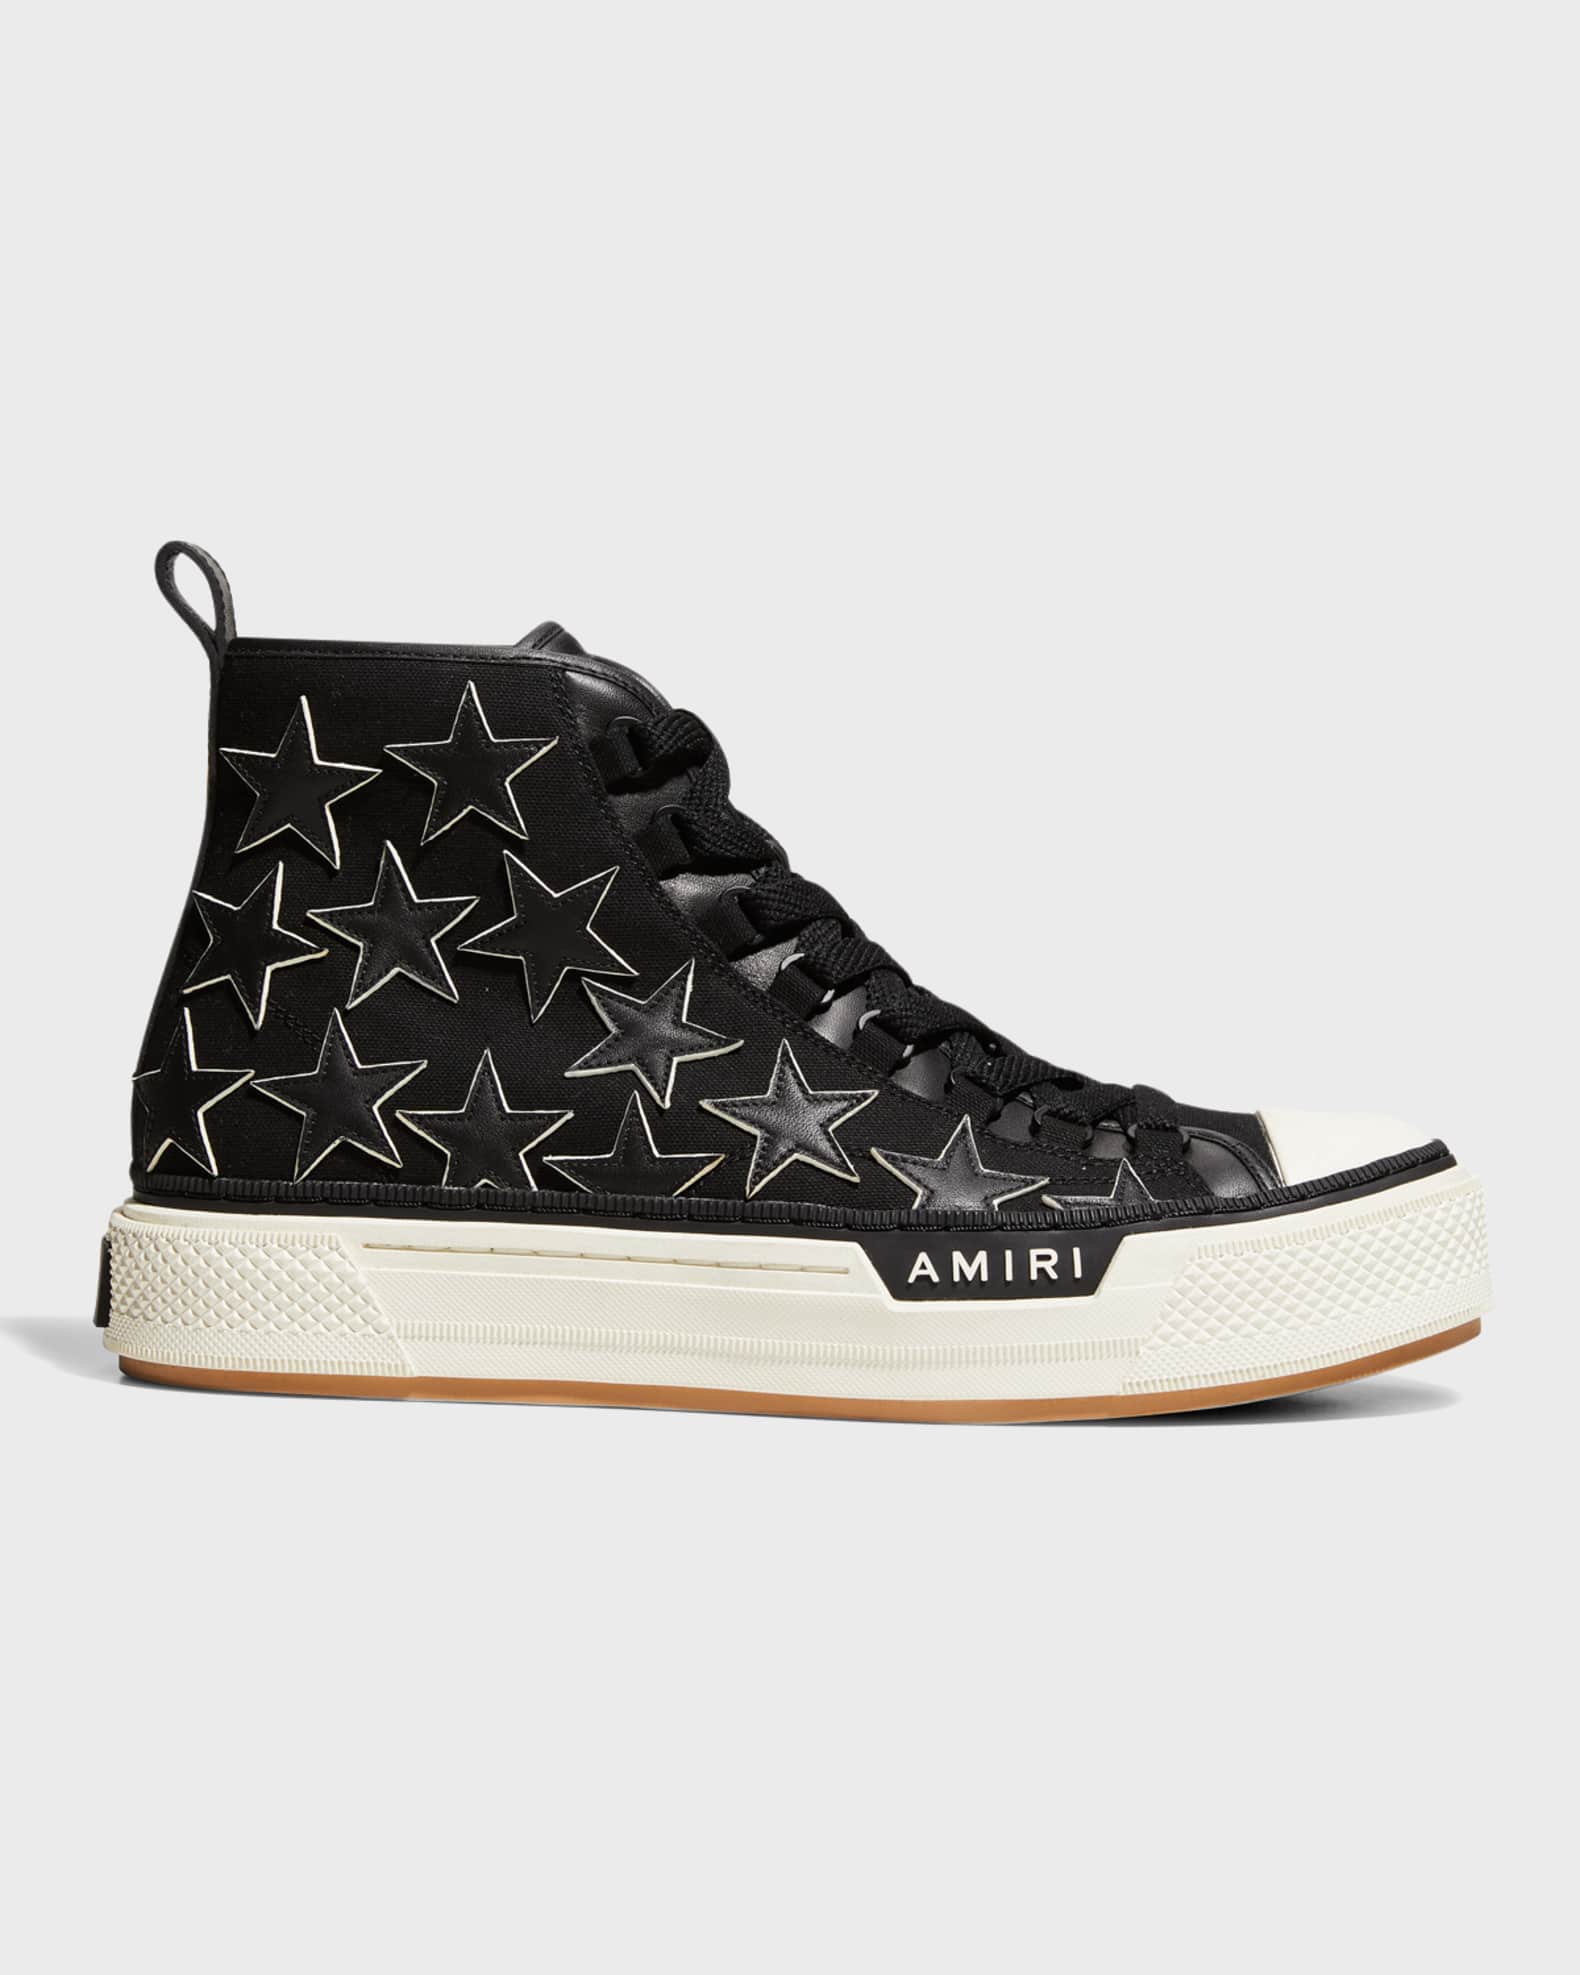 Louis Vuitton Knit Fabric Heart Patch High Top Sneakers